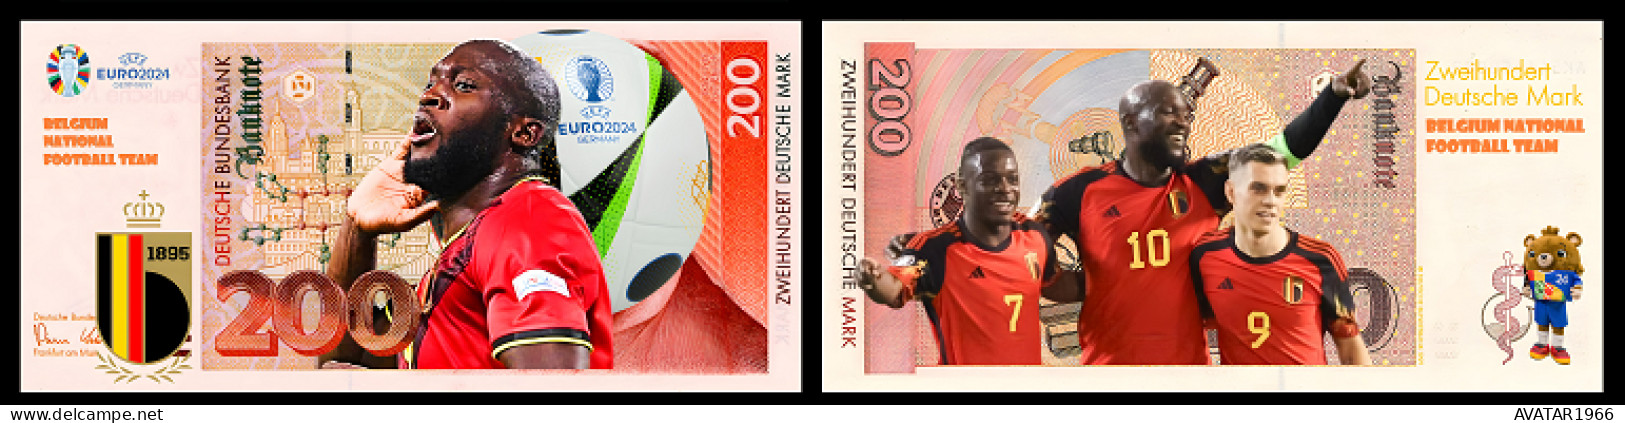 UEFA European Football Championship 2024 qualified country  Belgium 8 pieces Germany fantasy paper money